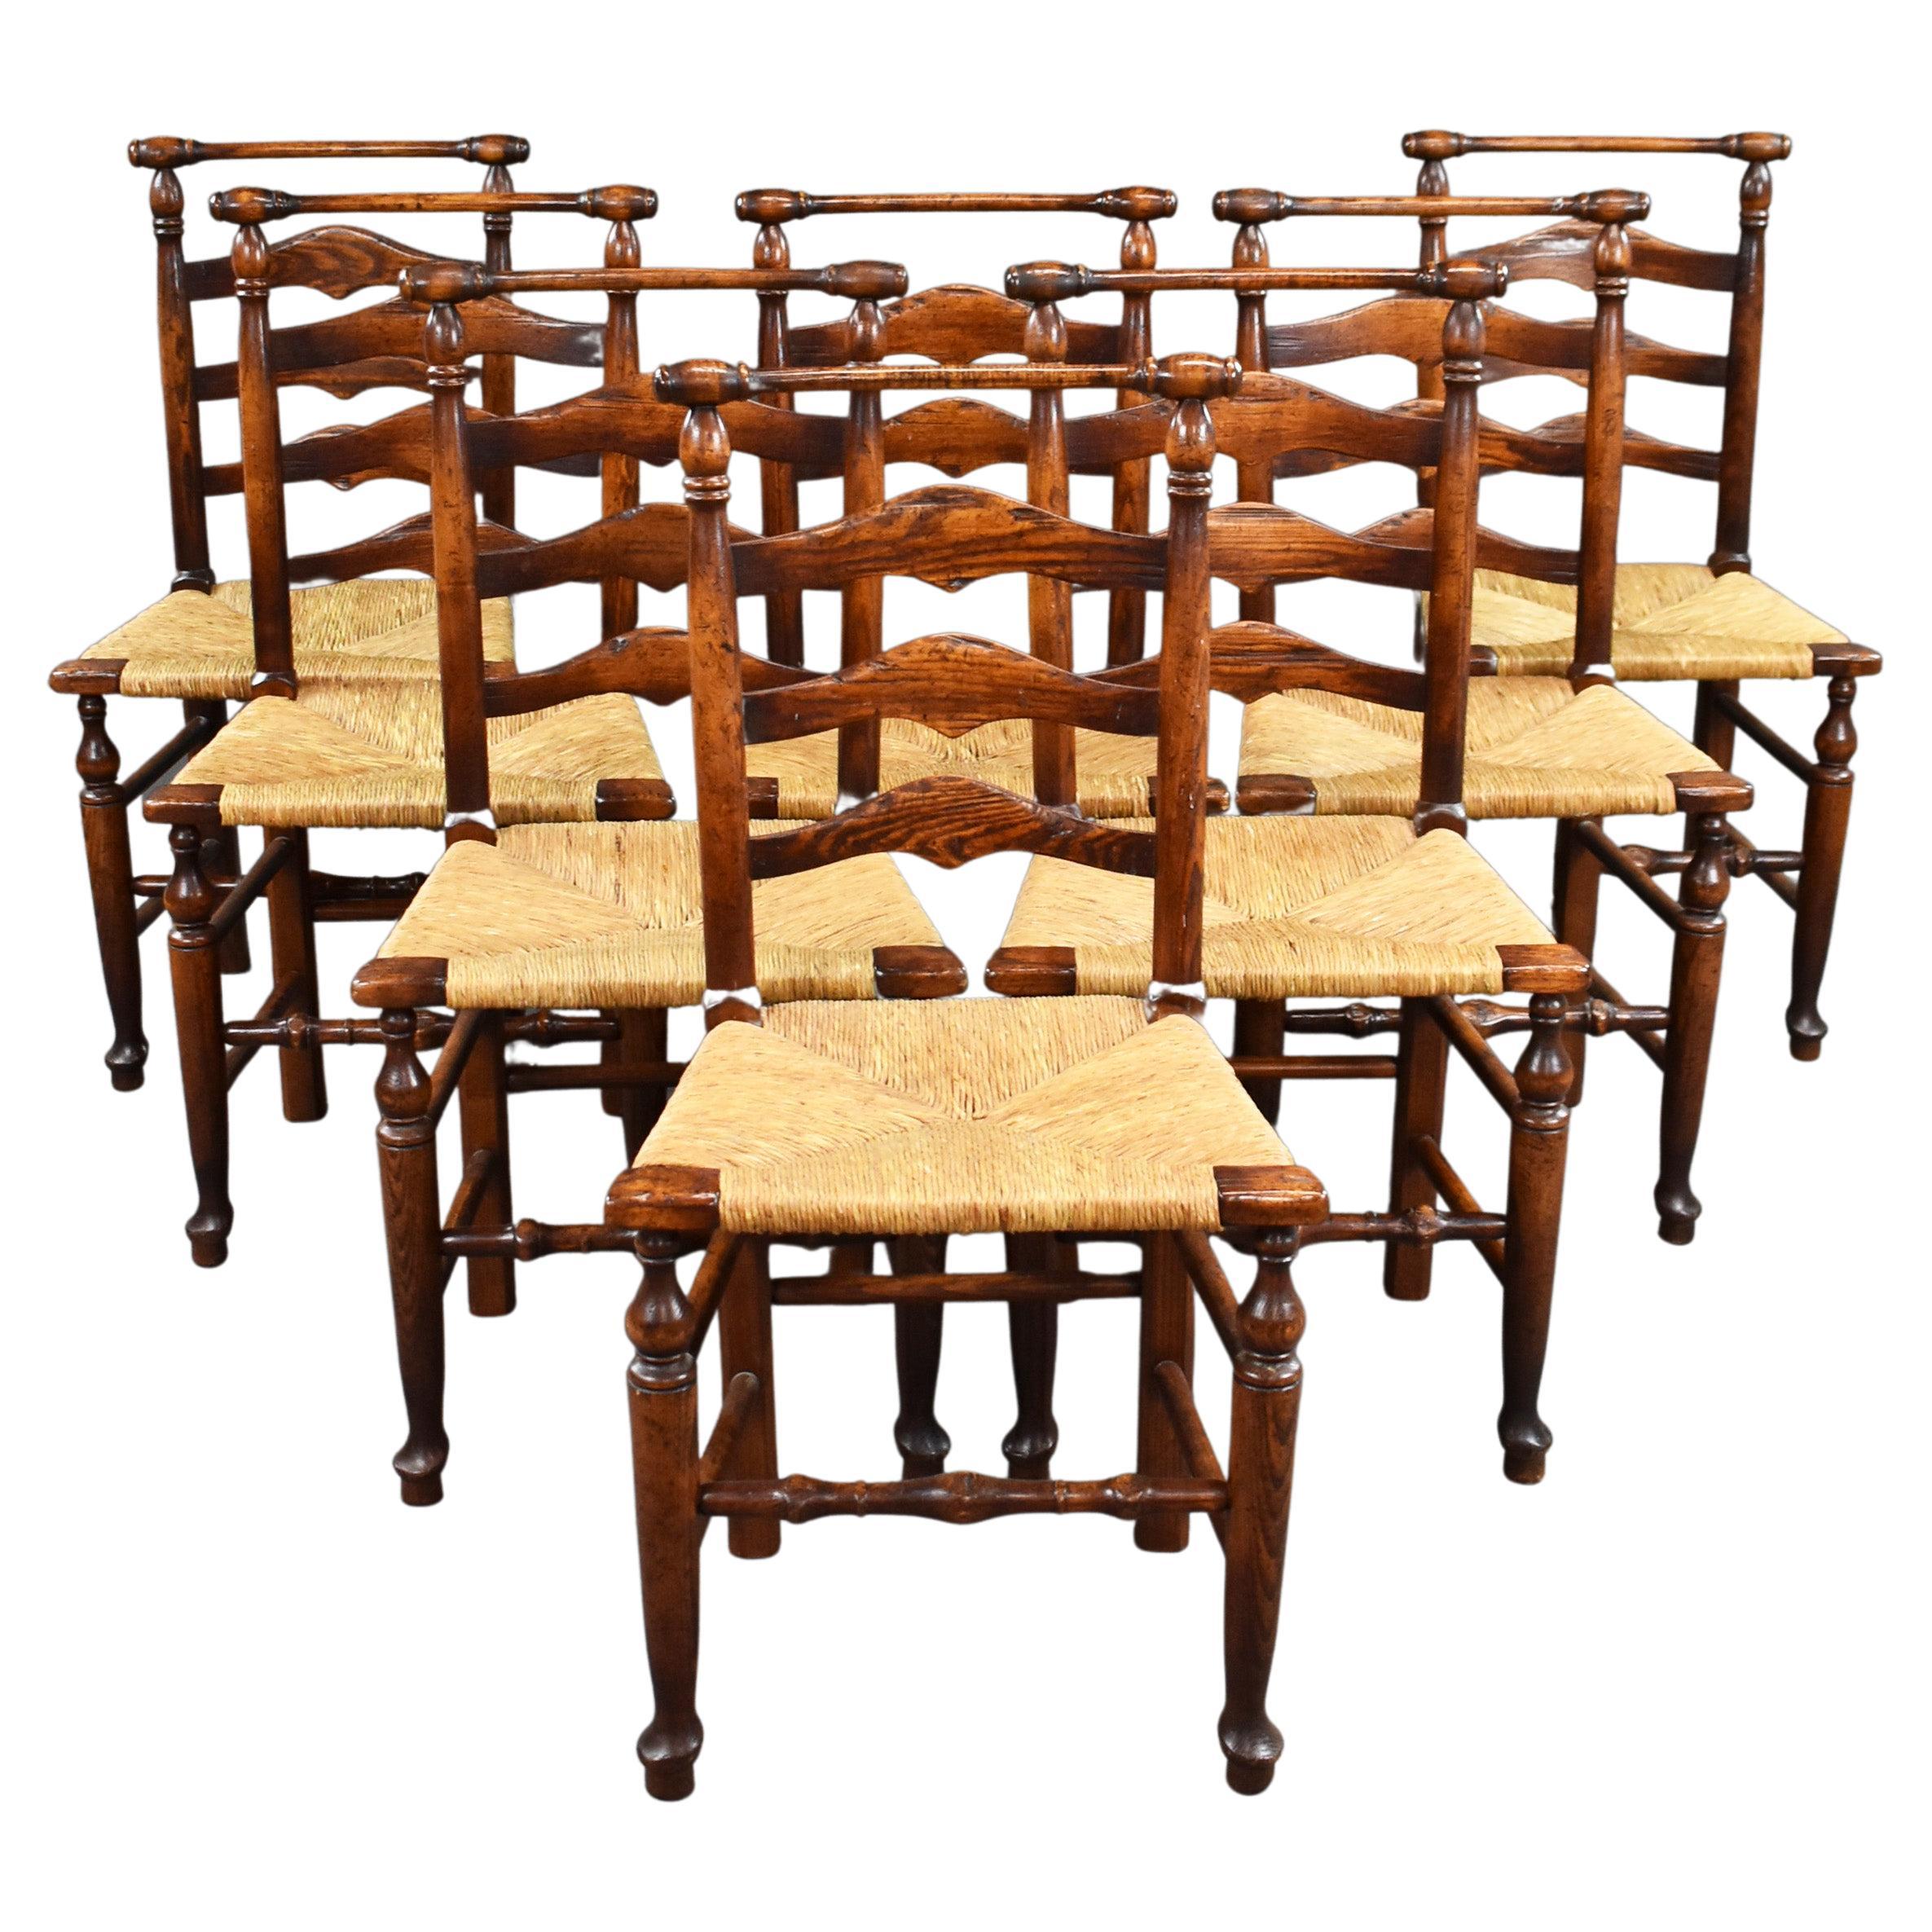 Set of 8 English 18th Century Style Ladder Back Dining Chairs